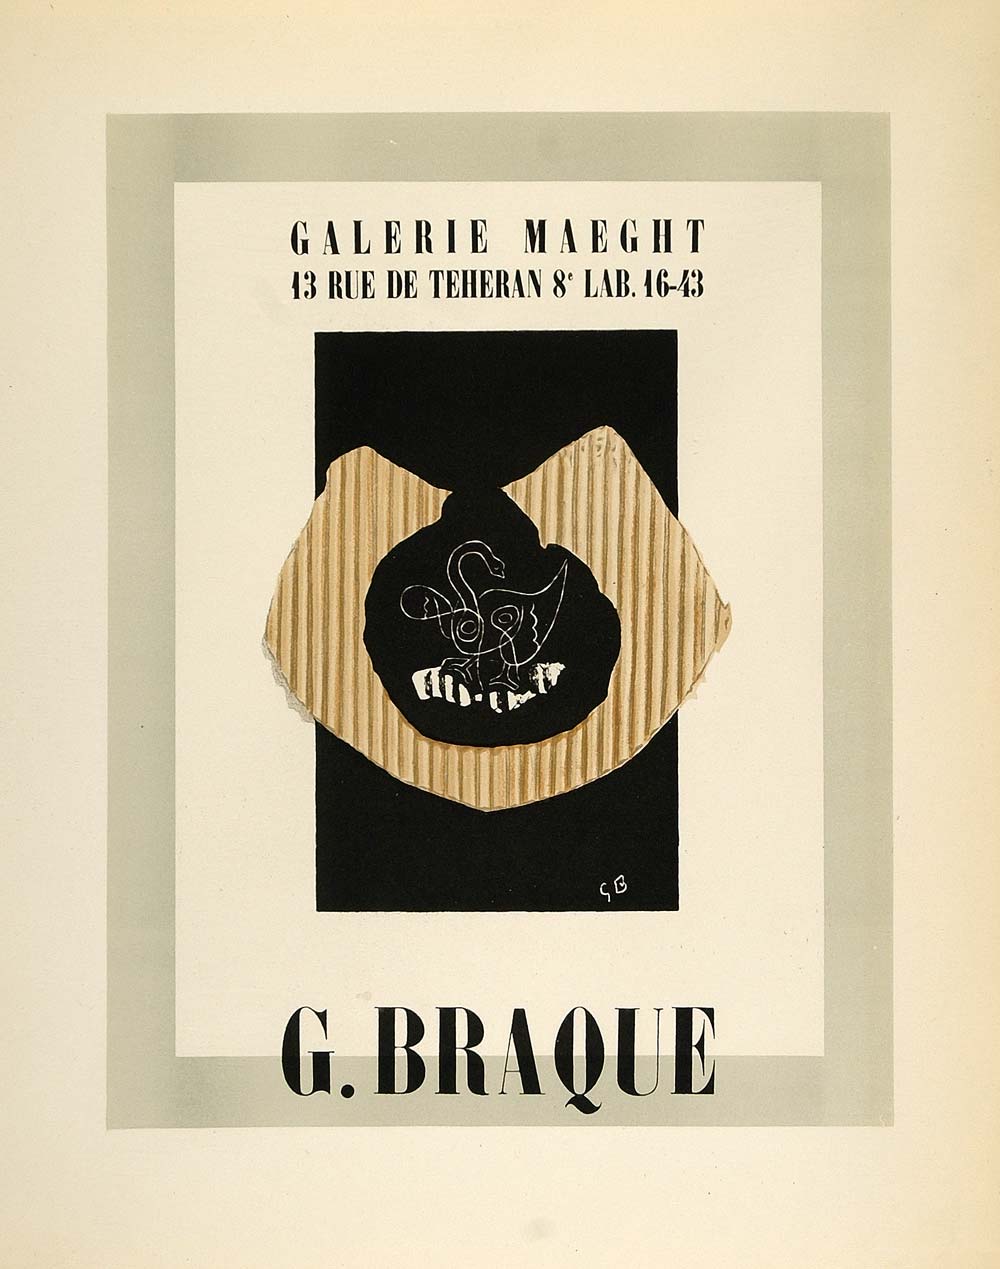 1959 Lithograph Georges Braque Poster Art Abstract Galerie Maeght Fernand Mourlot